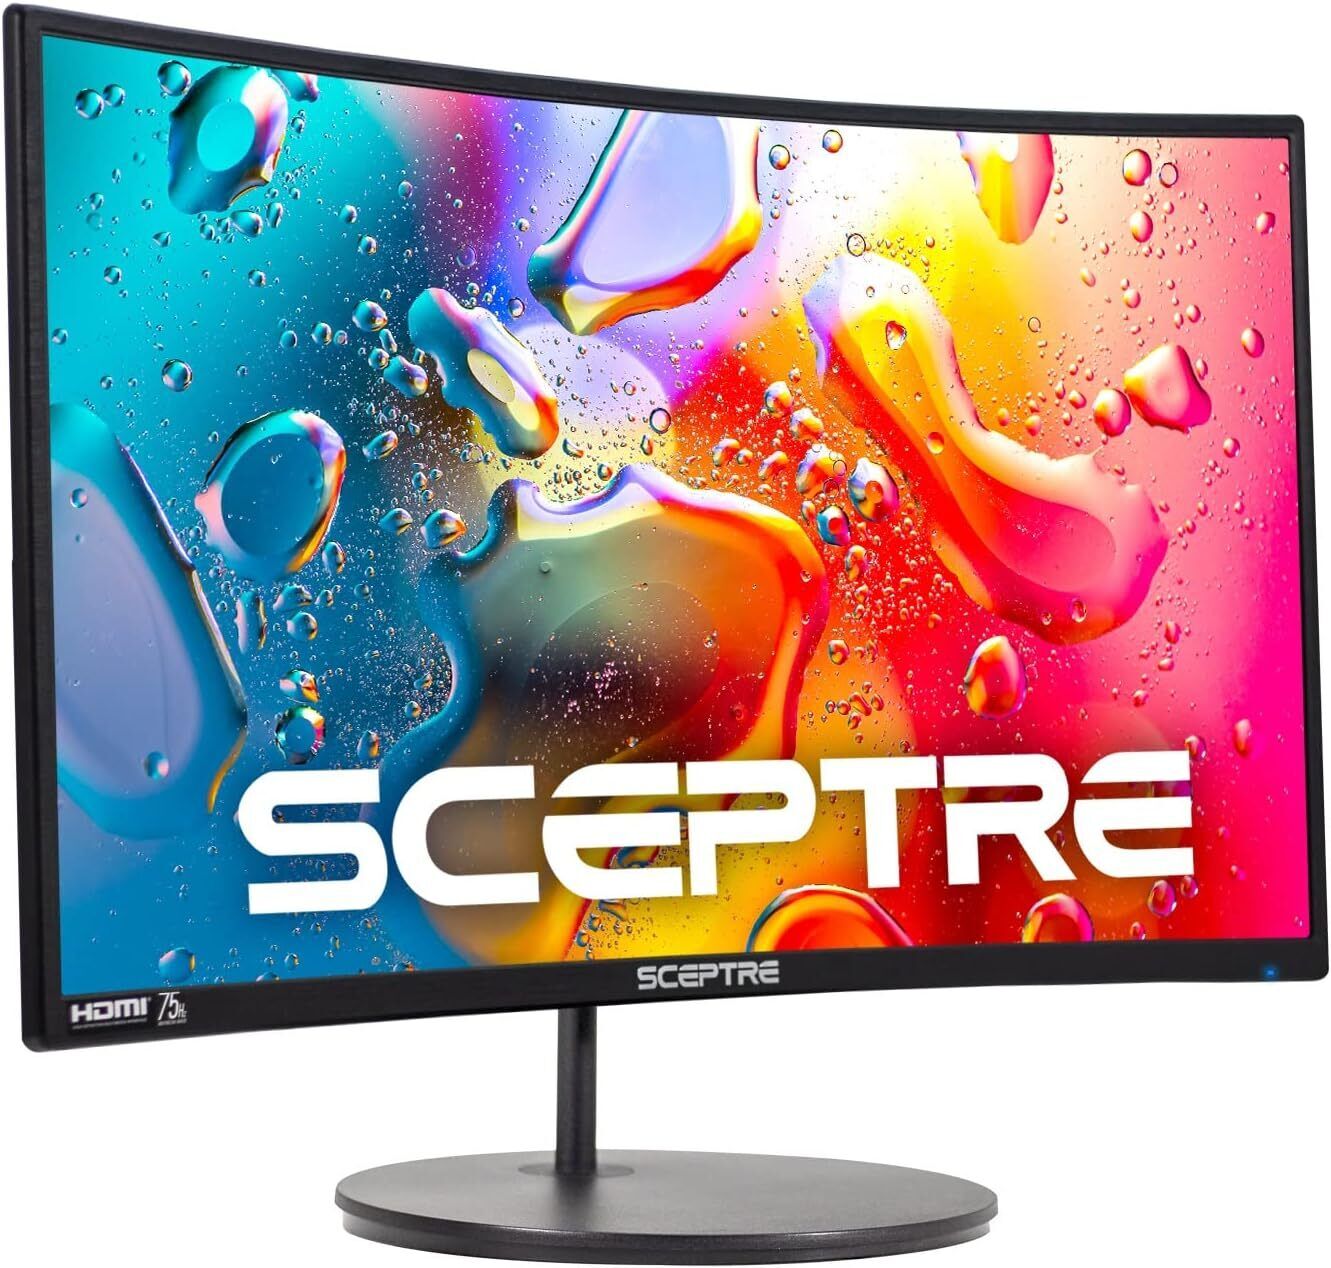 Sceptre Curved 24-Inch Gaming Monitor 1080P R1500 98% Srgb HDMI X2 VGA Build-In 